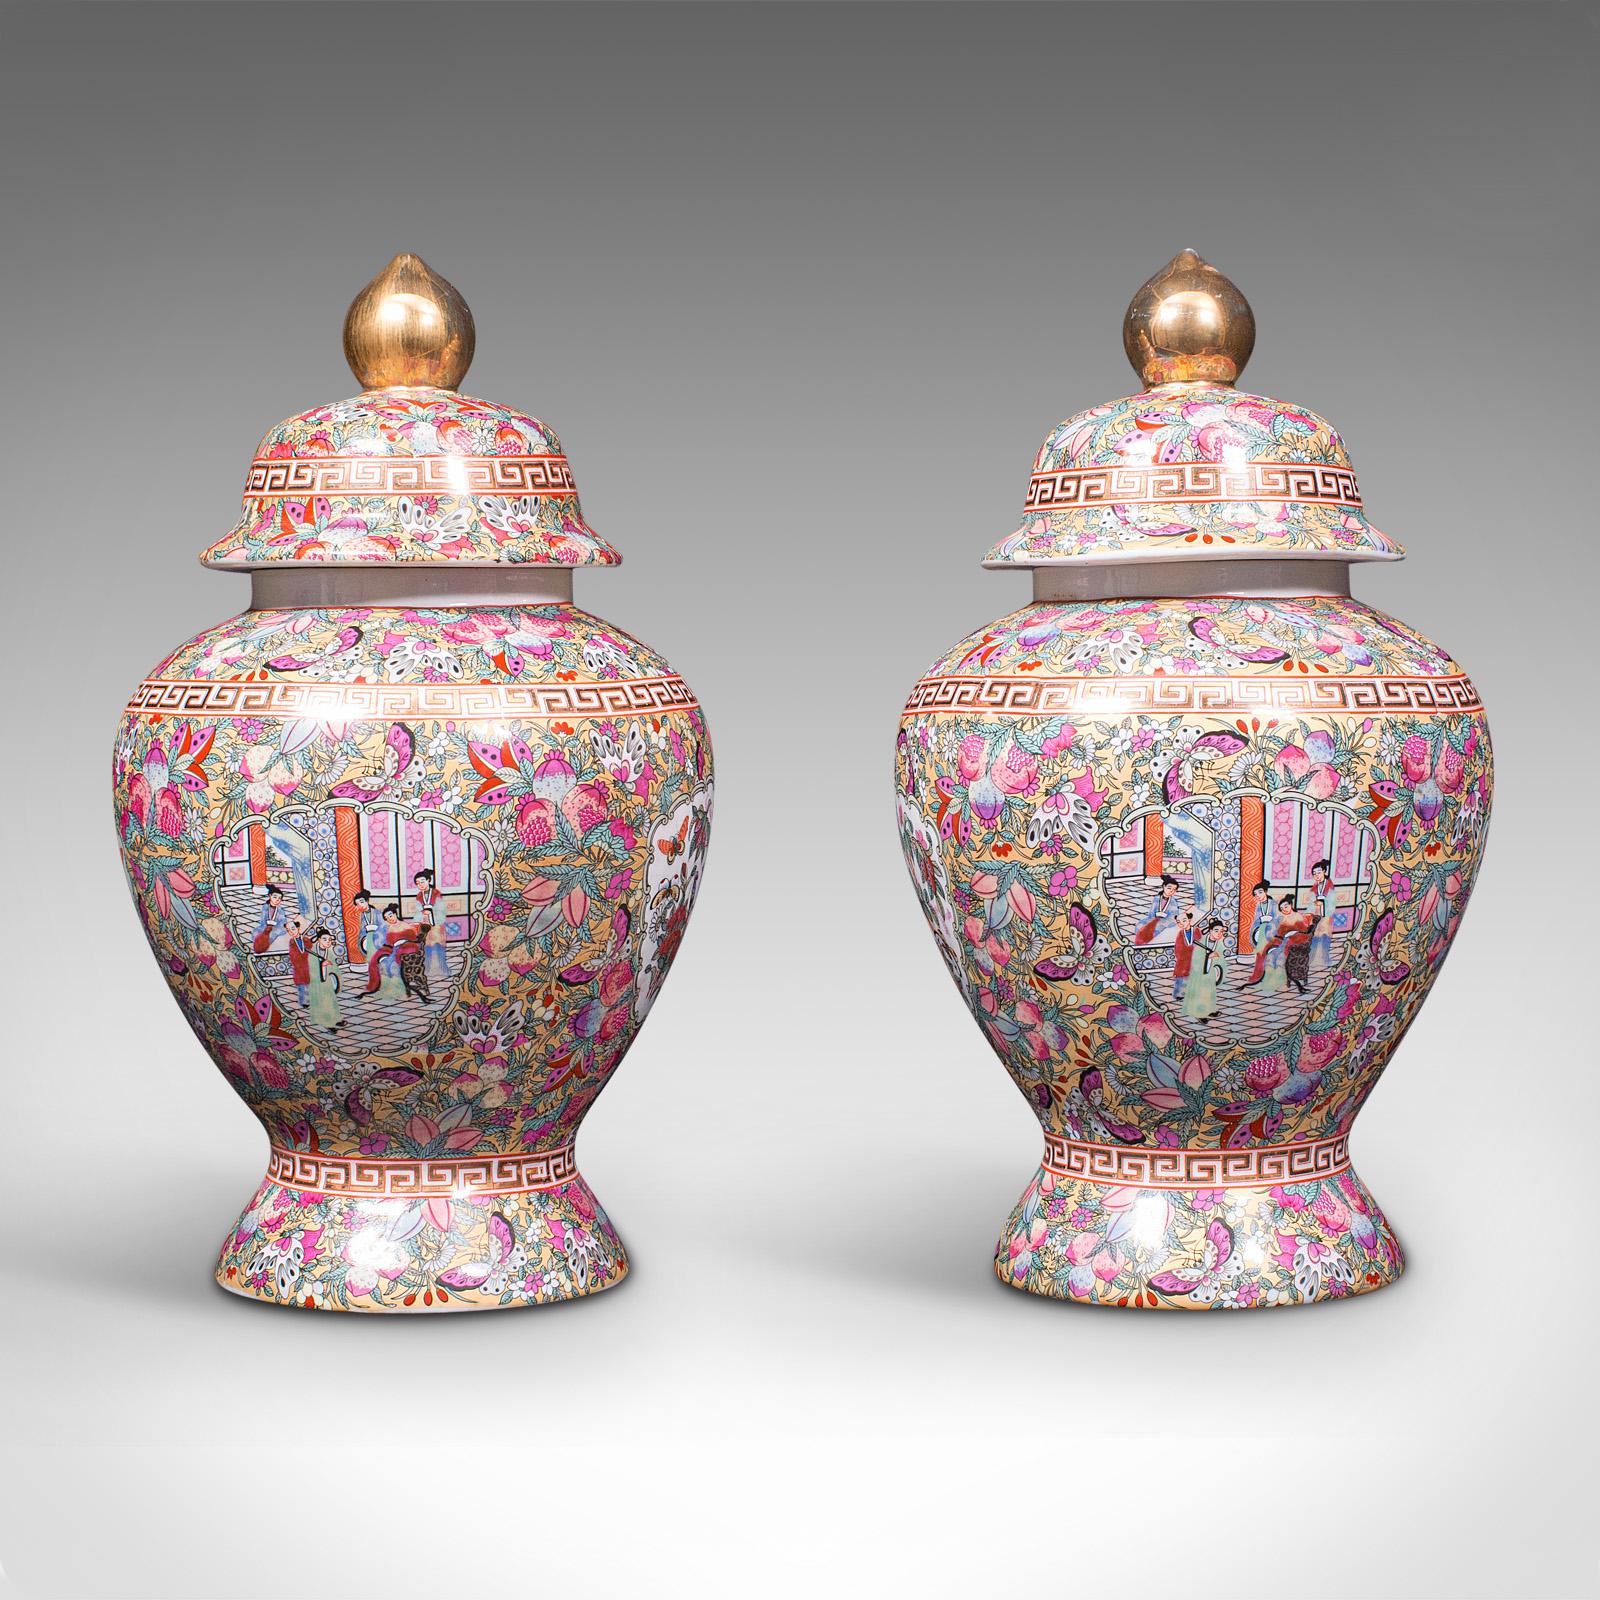 This is a large pair of vintage ginger jars. A Chinese, ceramic baluster or spice jar with profuse decoration, dating to the Art Deco period, circa 1940.

A treat of colour and fine detail upon large proportions
Displaying a desirable aged patina